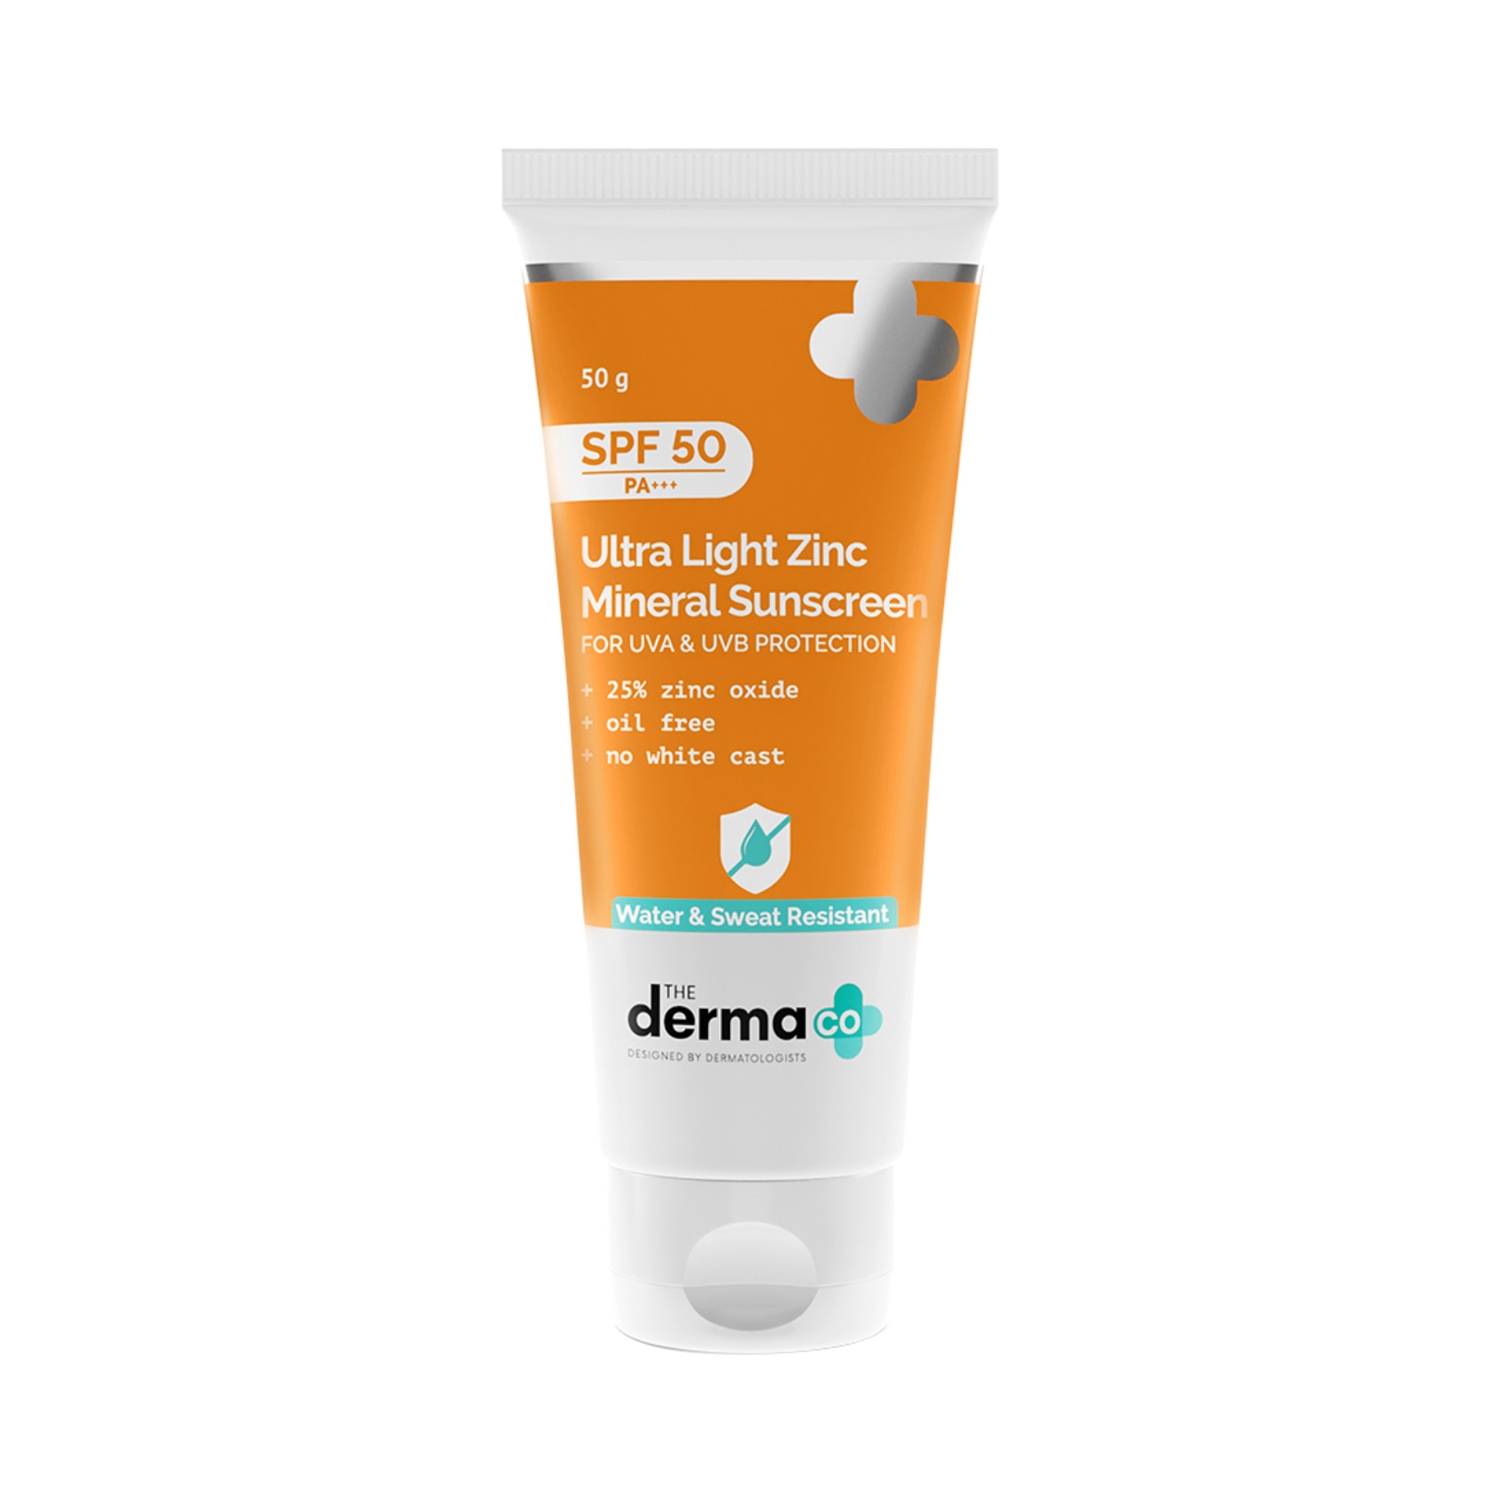 The Derma Co | The Derma Co Ultra Light Zinc Mineral Sunscreen with SPF 50 (50g)